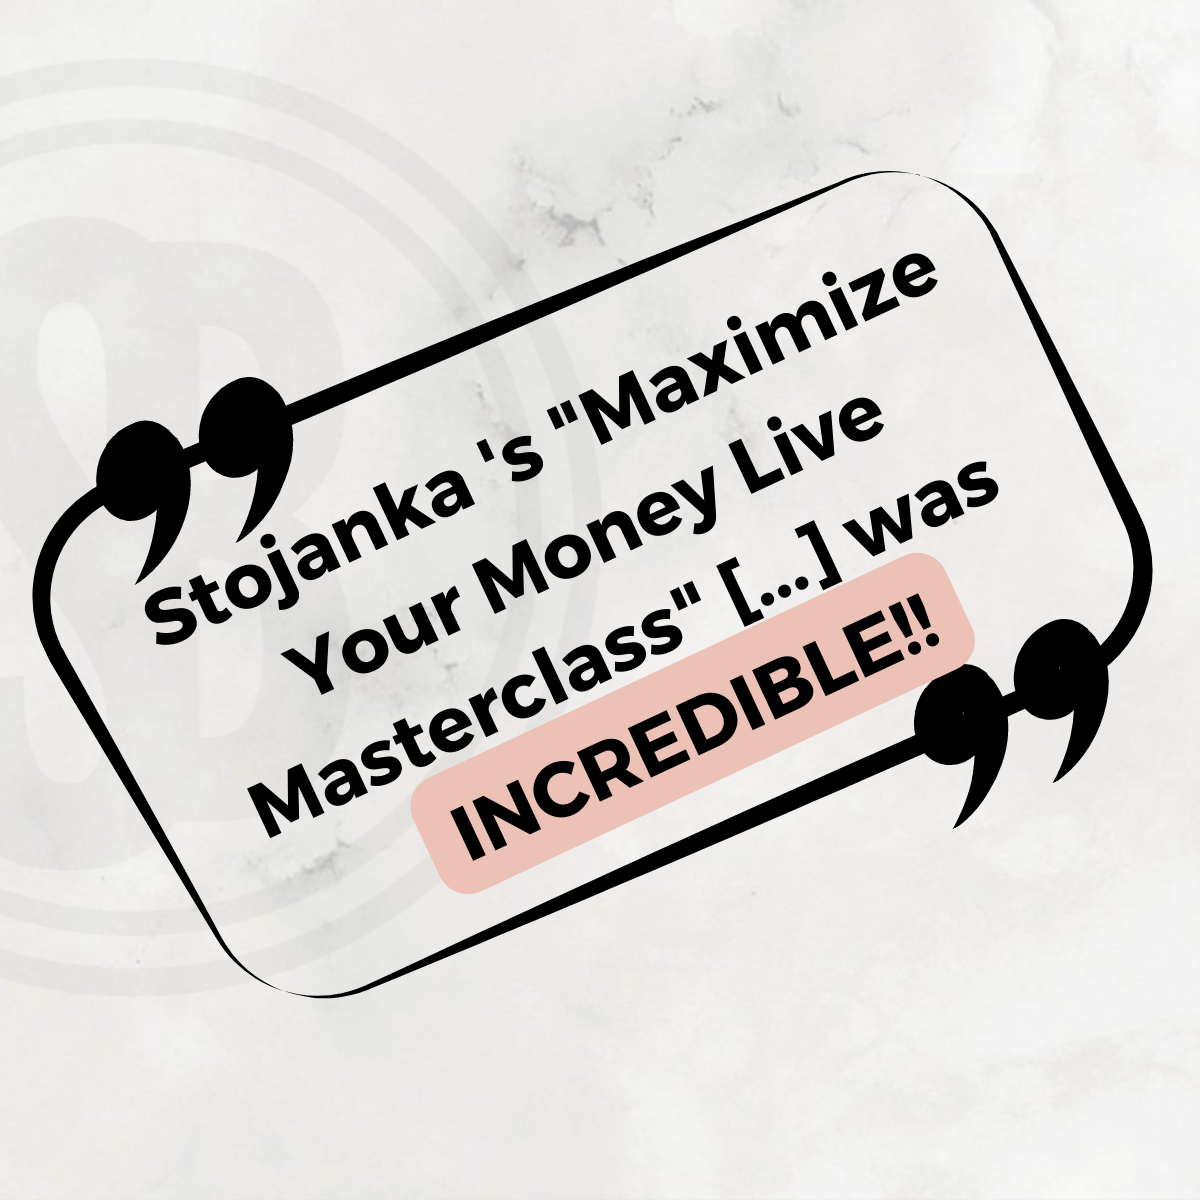 Testimonial from a masterclass participant, which reads: Stojanka's 